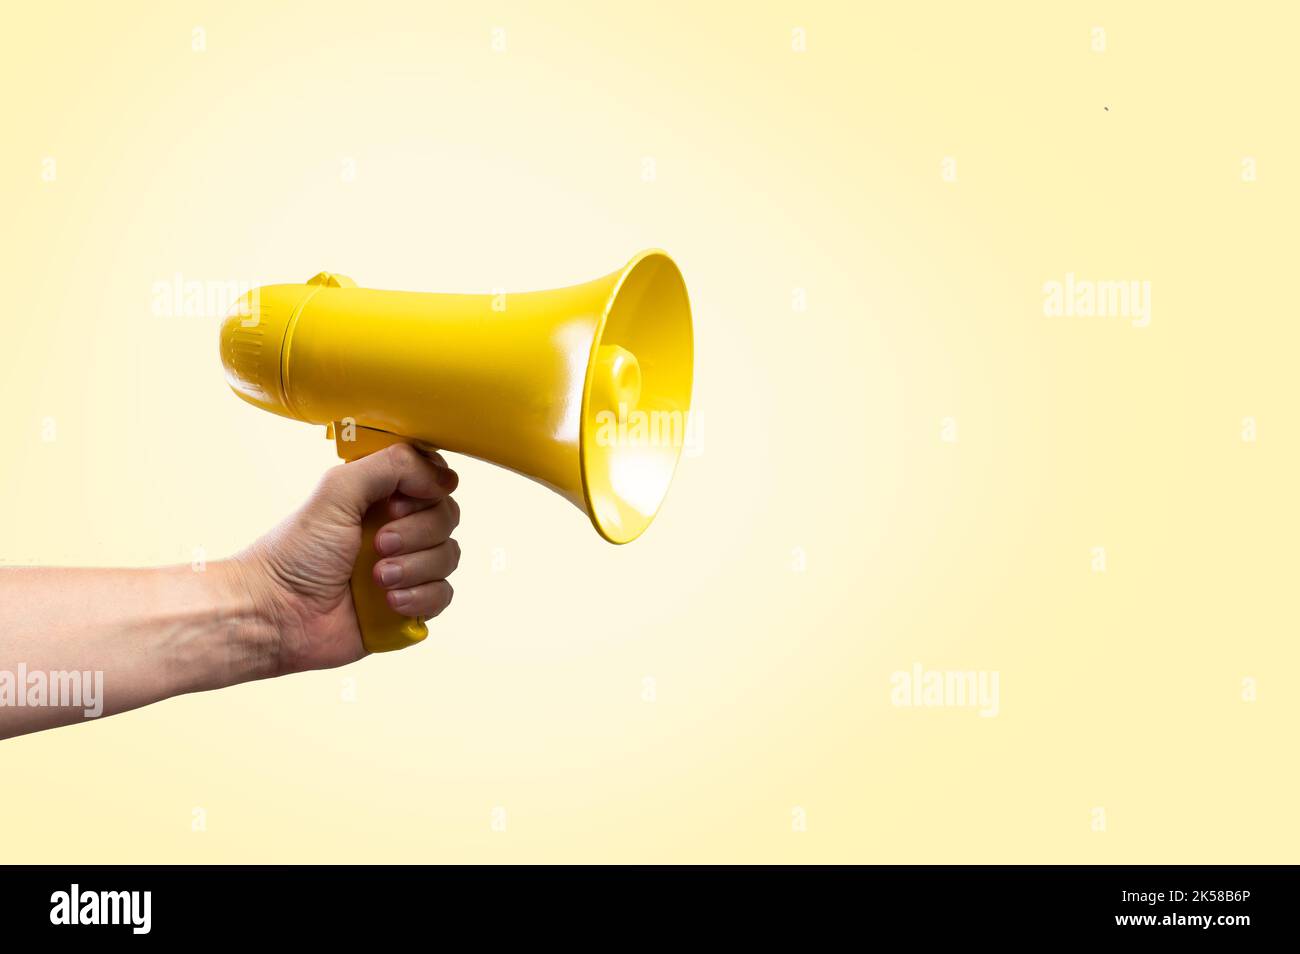 In the hand of a man is a yellow megaphone on a light beige background. Minimalism. Propaganda, rumors, journalism, media, business, election debates. Stock Photo